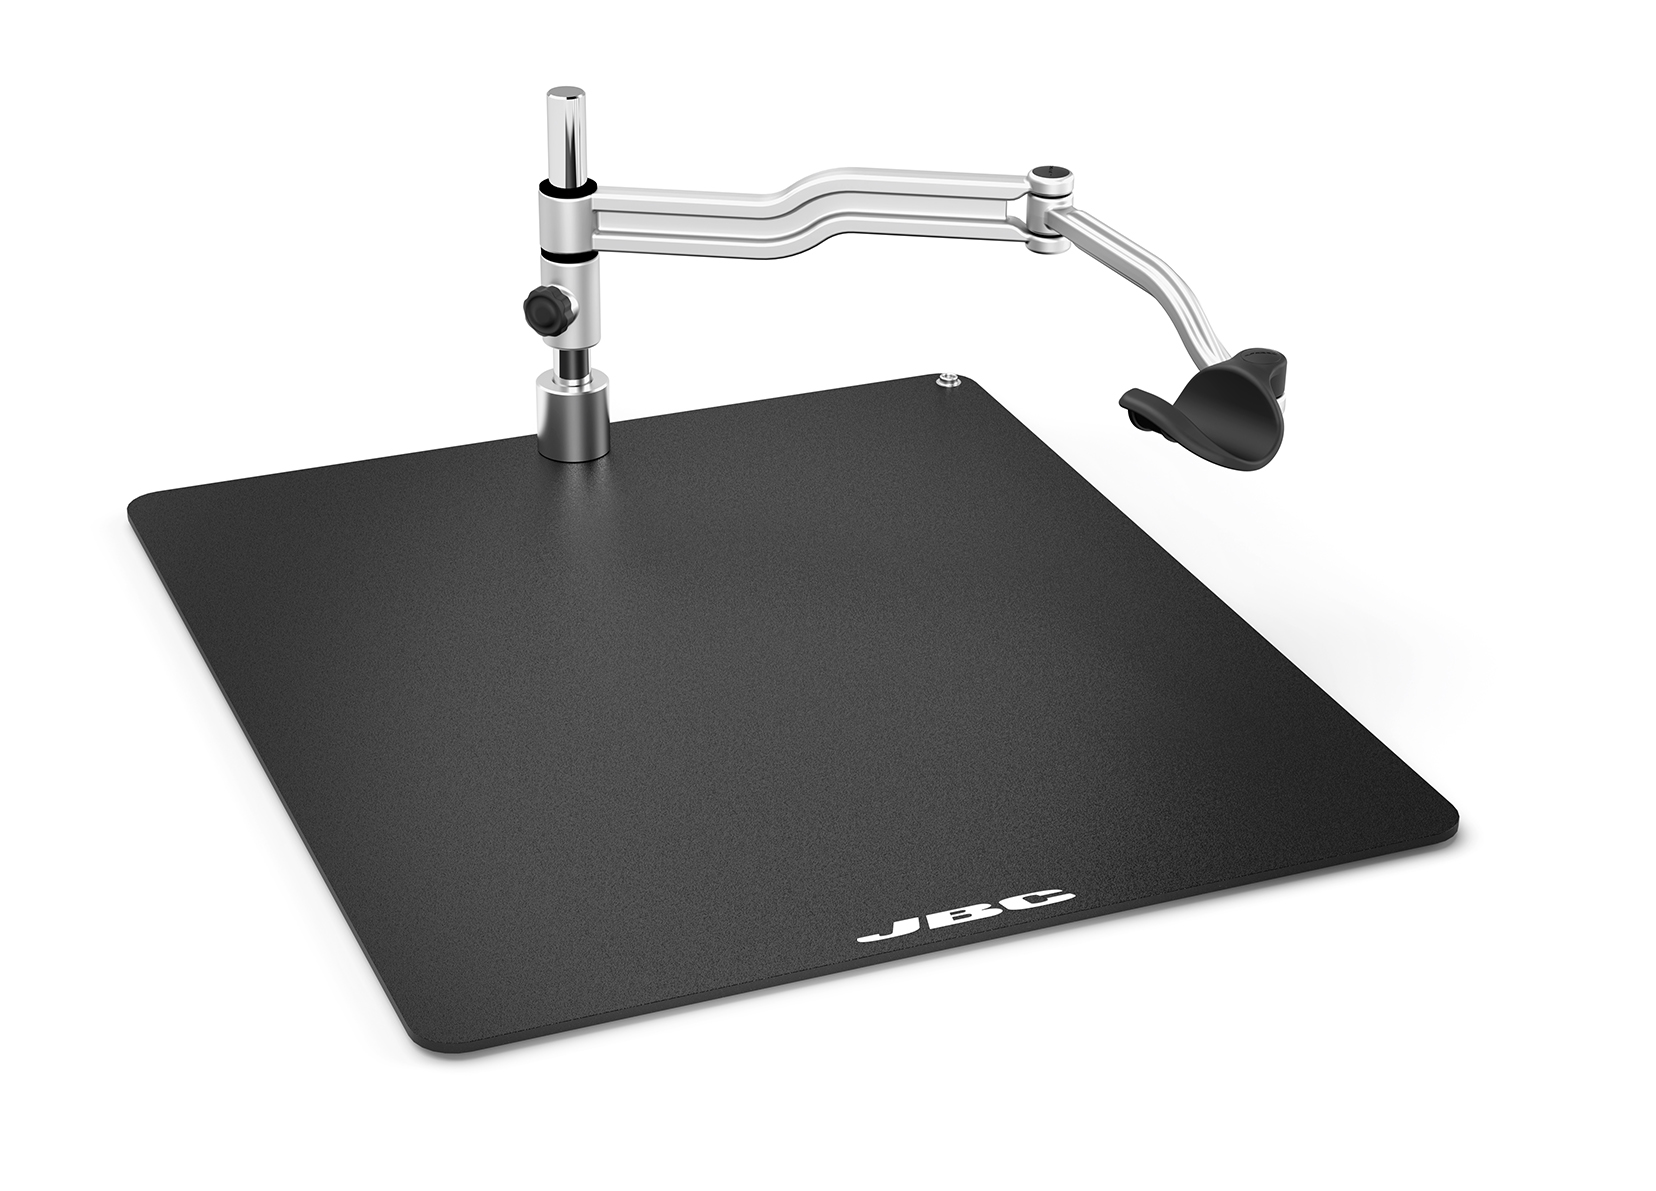 RHB-A - Articulated Hand Rest with base for PHBEK